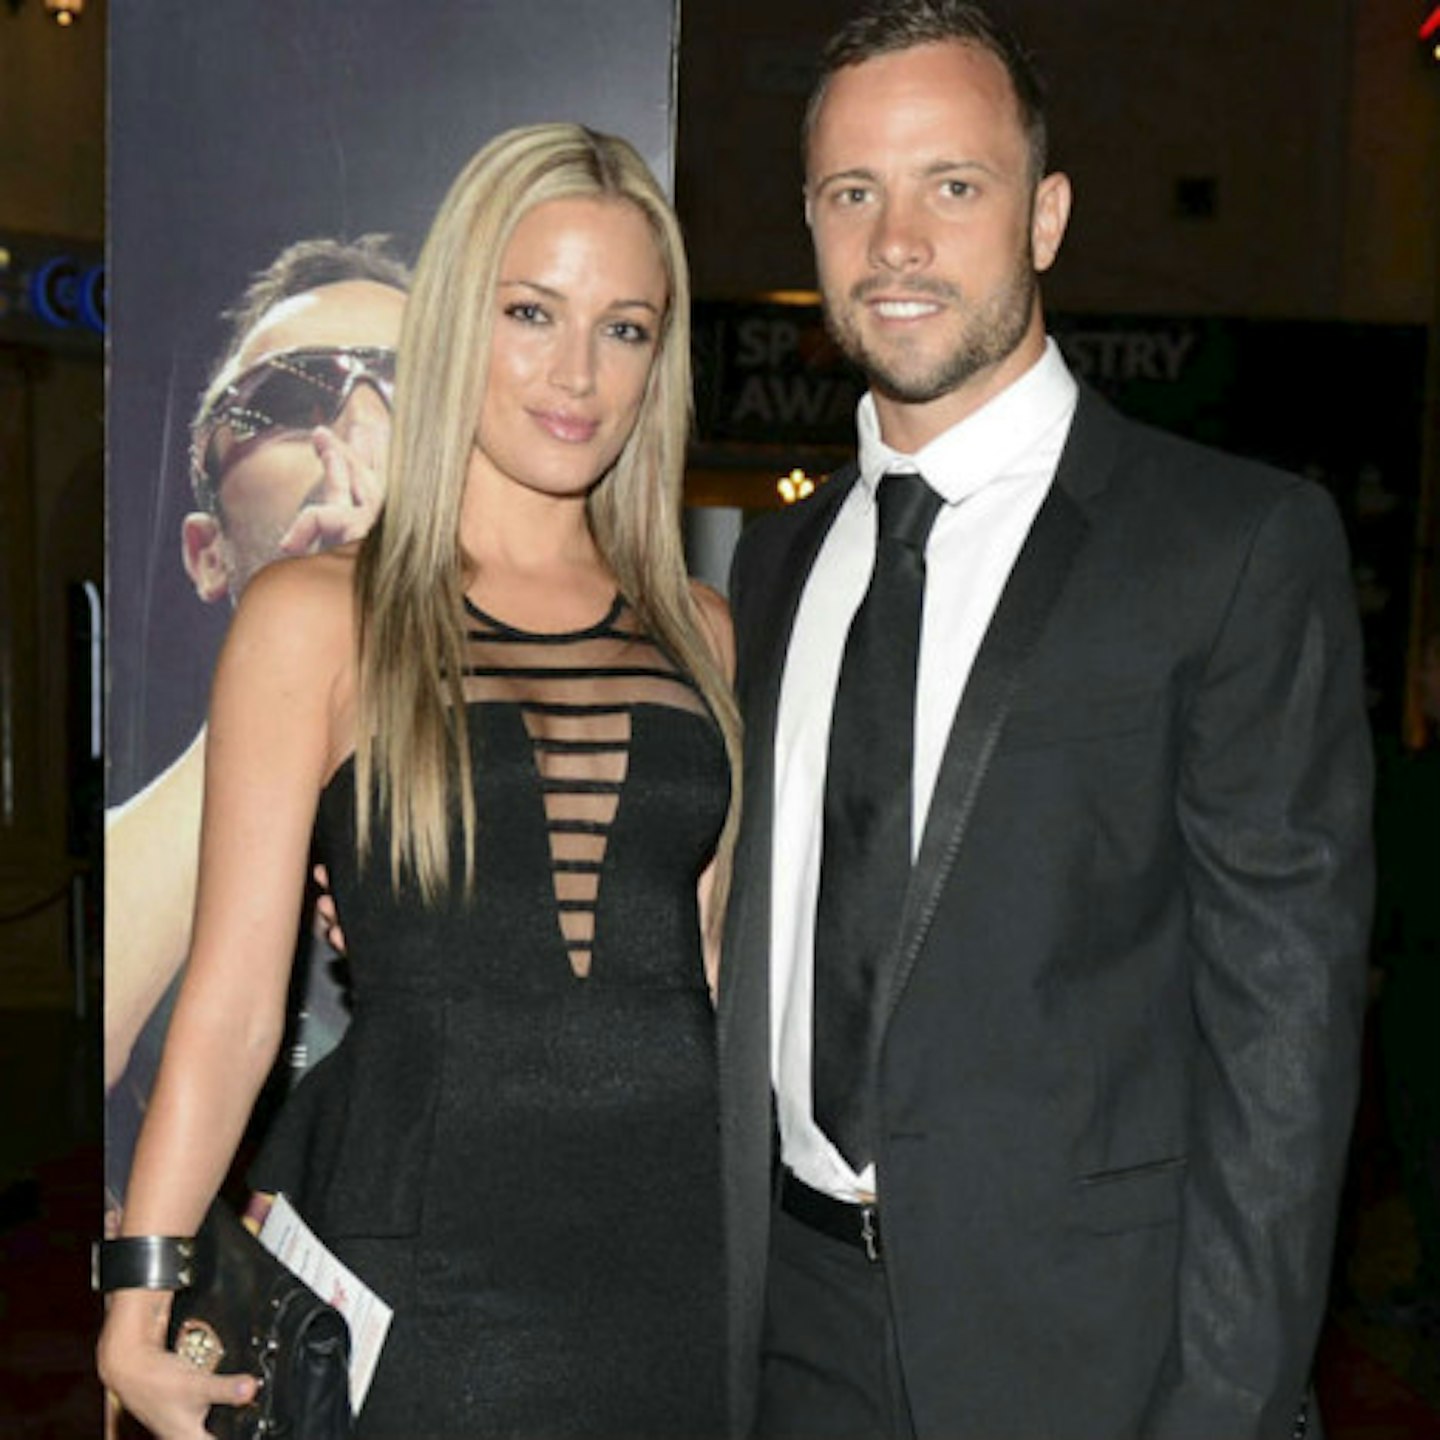 The state argue Pistorius killed his girlfriend, Reeva Steenkamp, after an argument - which he denies